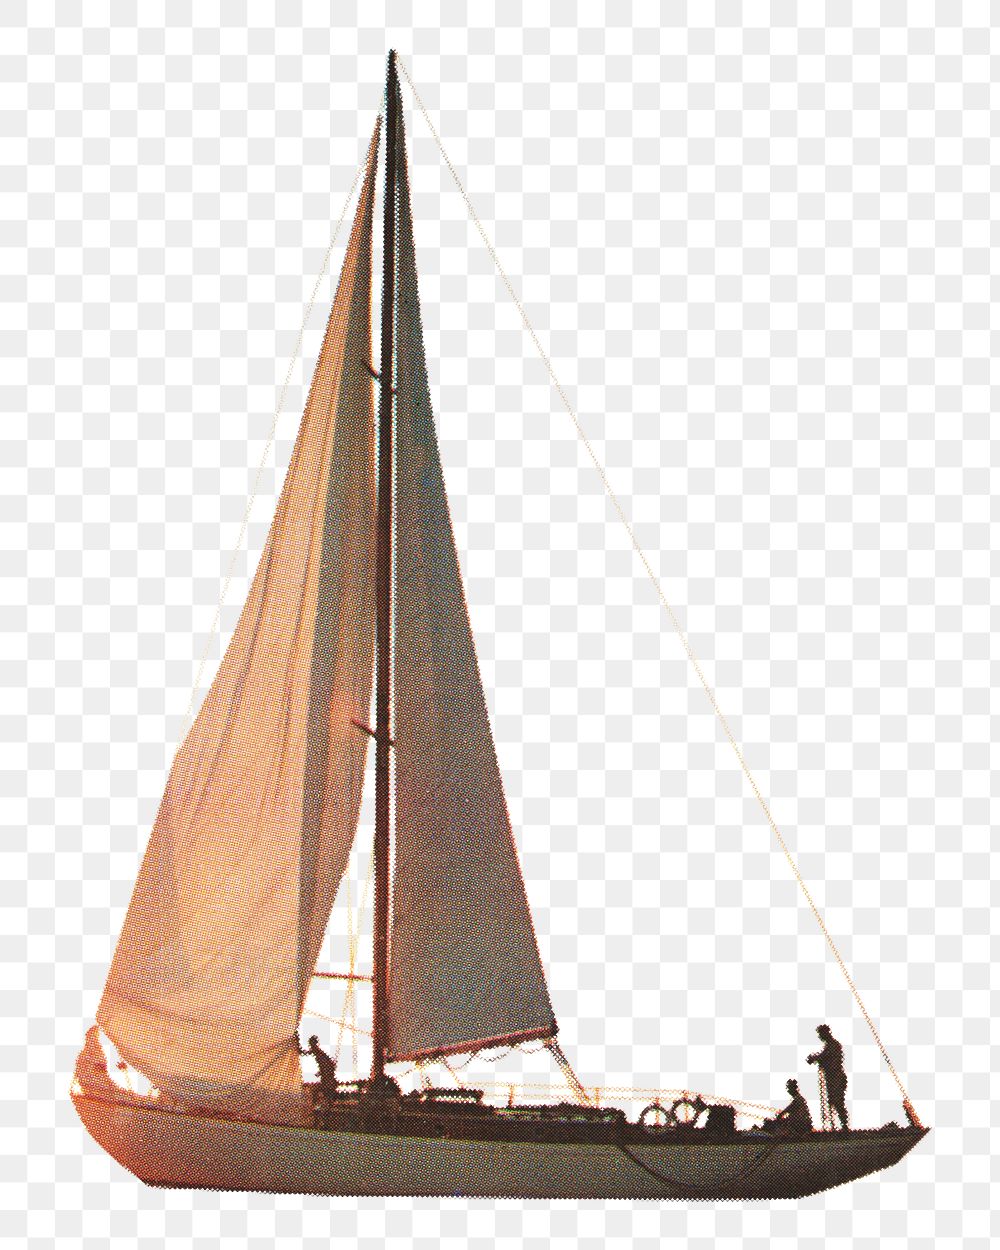 Sailboat png, vehicle image, transparent background. Remixed by rawpixel.